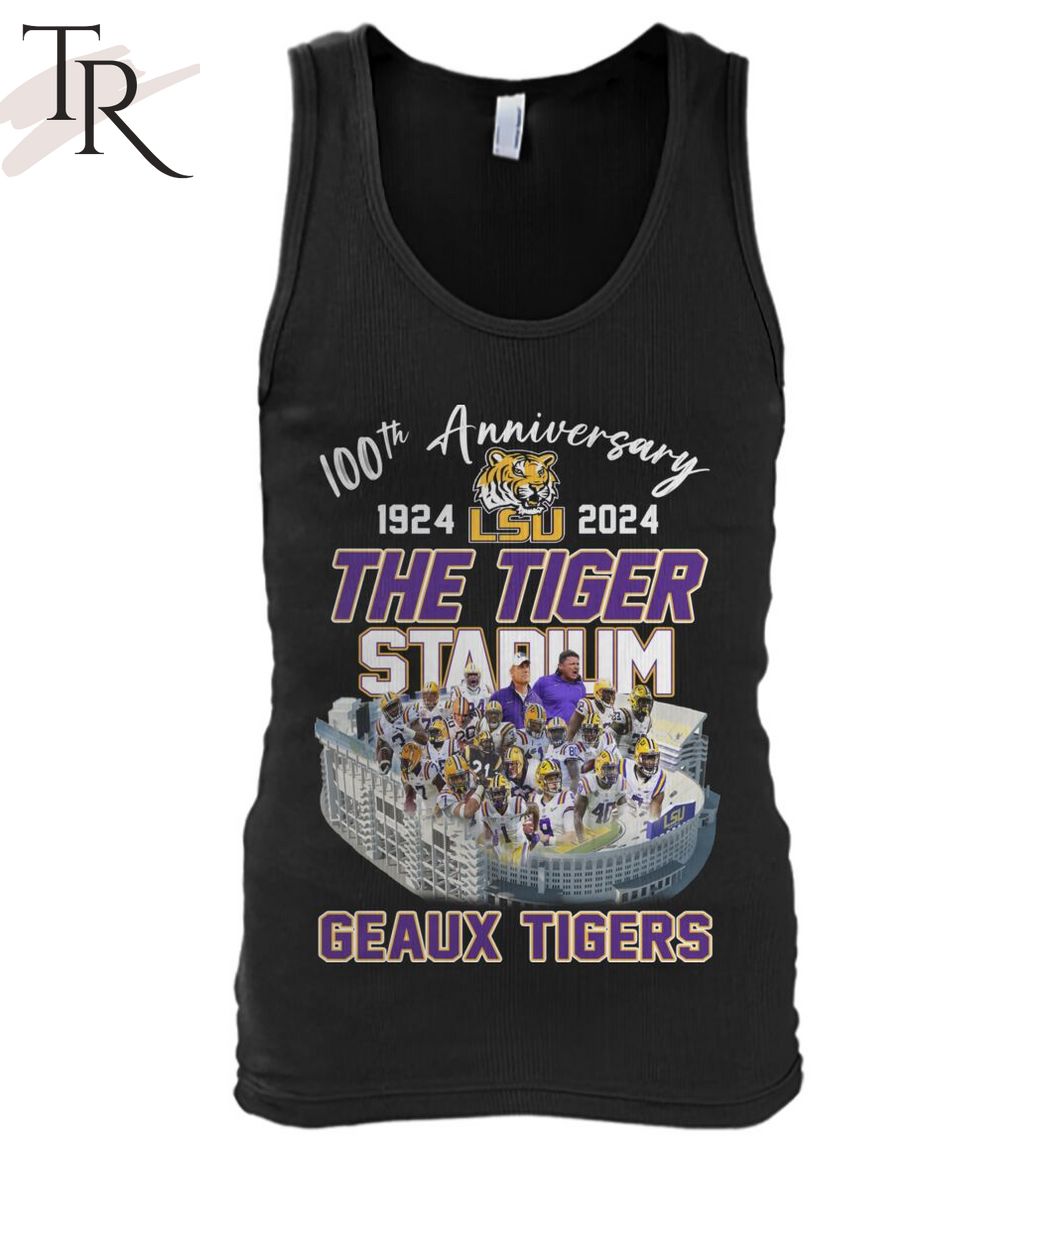 100th Anniversary 1924-2024 The Tiger Stadium Geaux Tigers T-Shirt